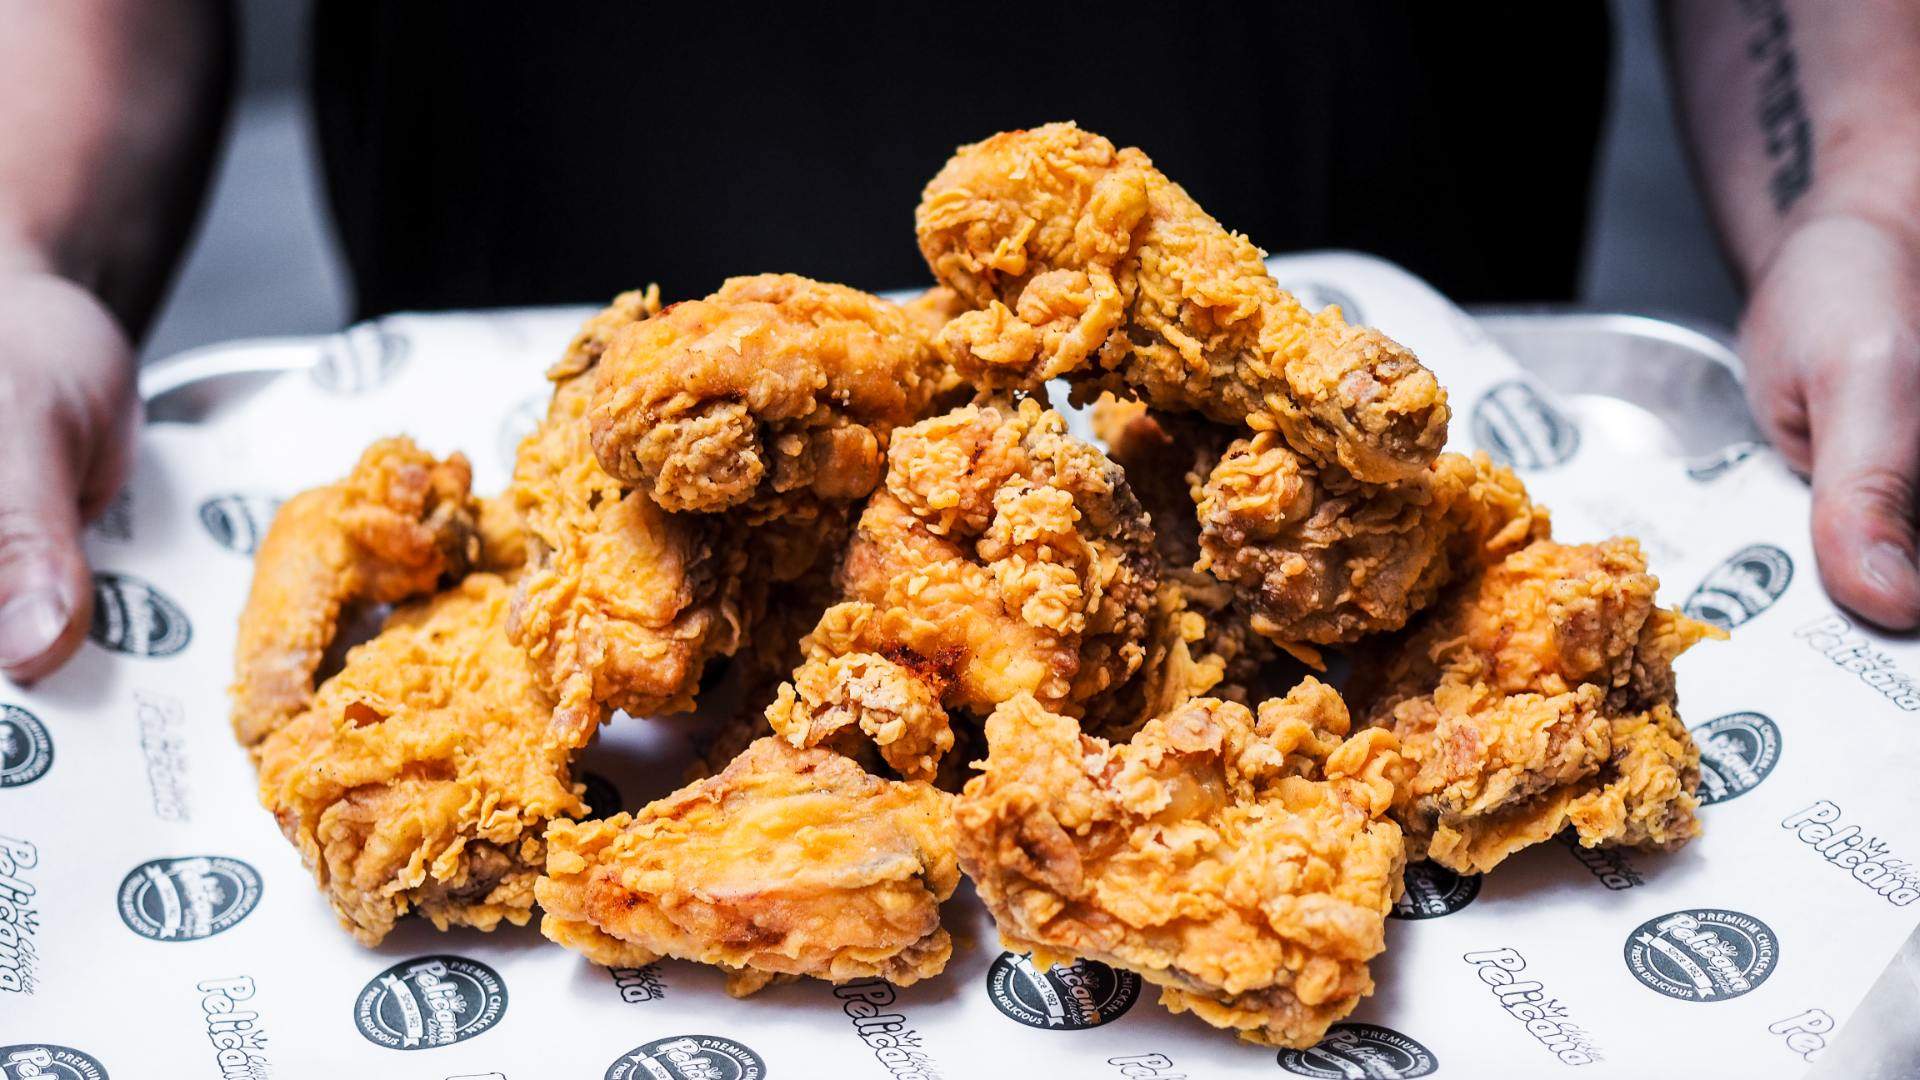 Where to Find the Best Fried Chicken in Melbourne